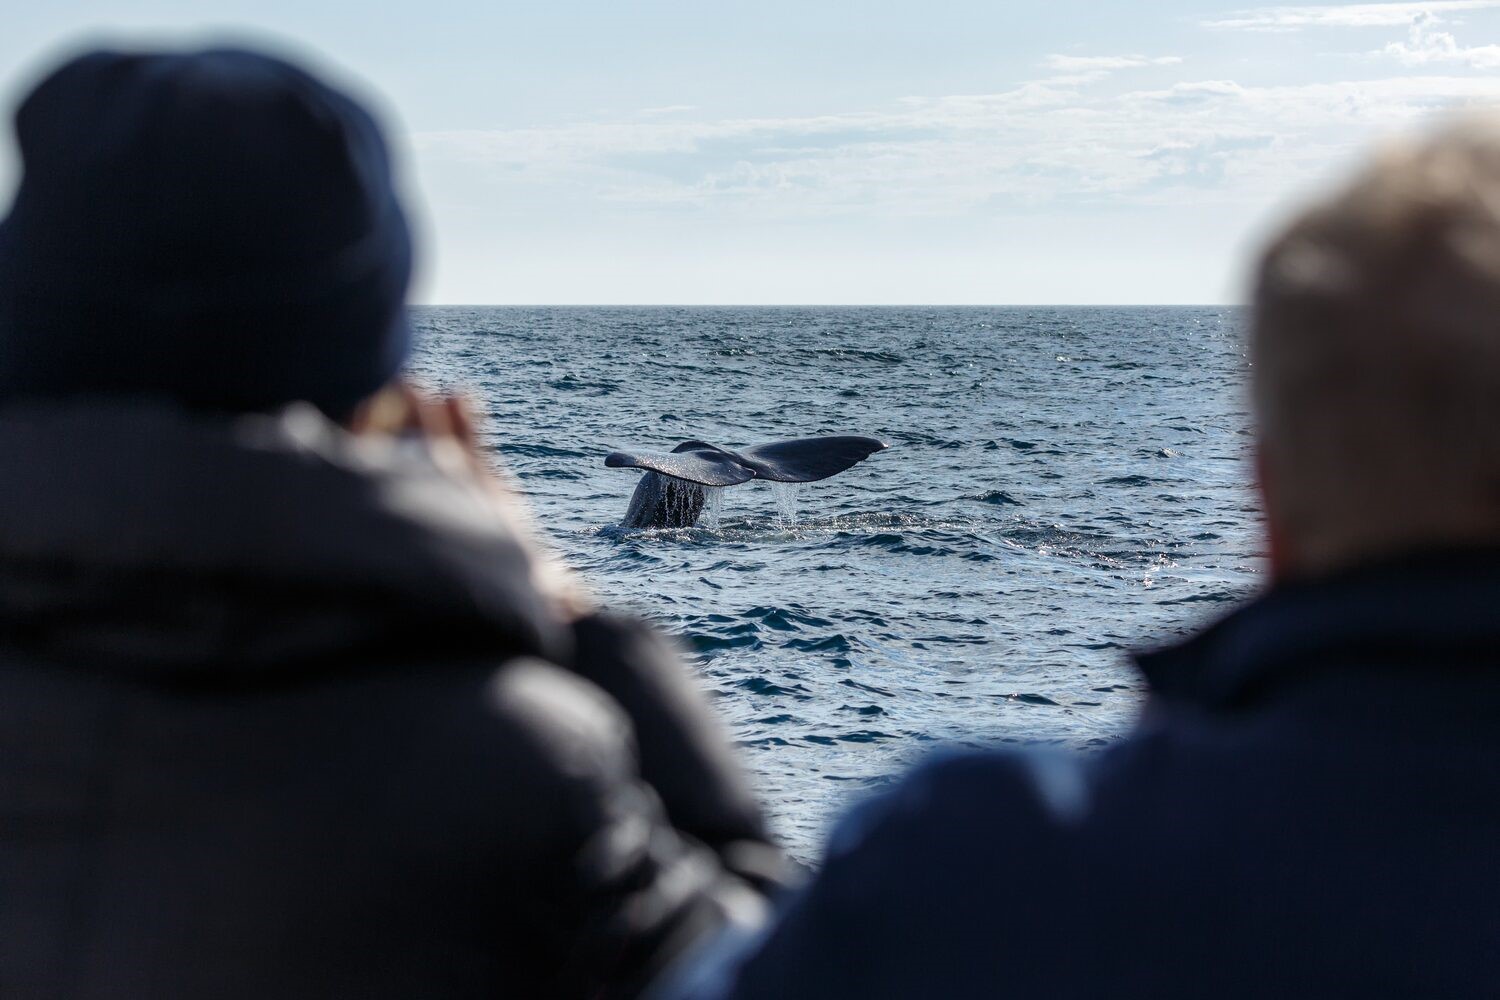 Tourists on whale watching tour in Iceland, viewing whale tail in the sea